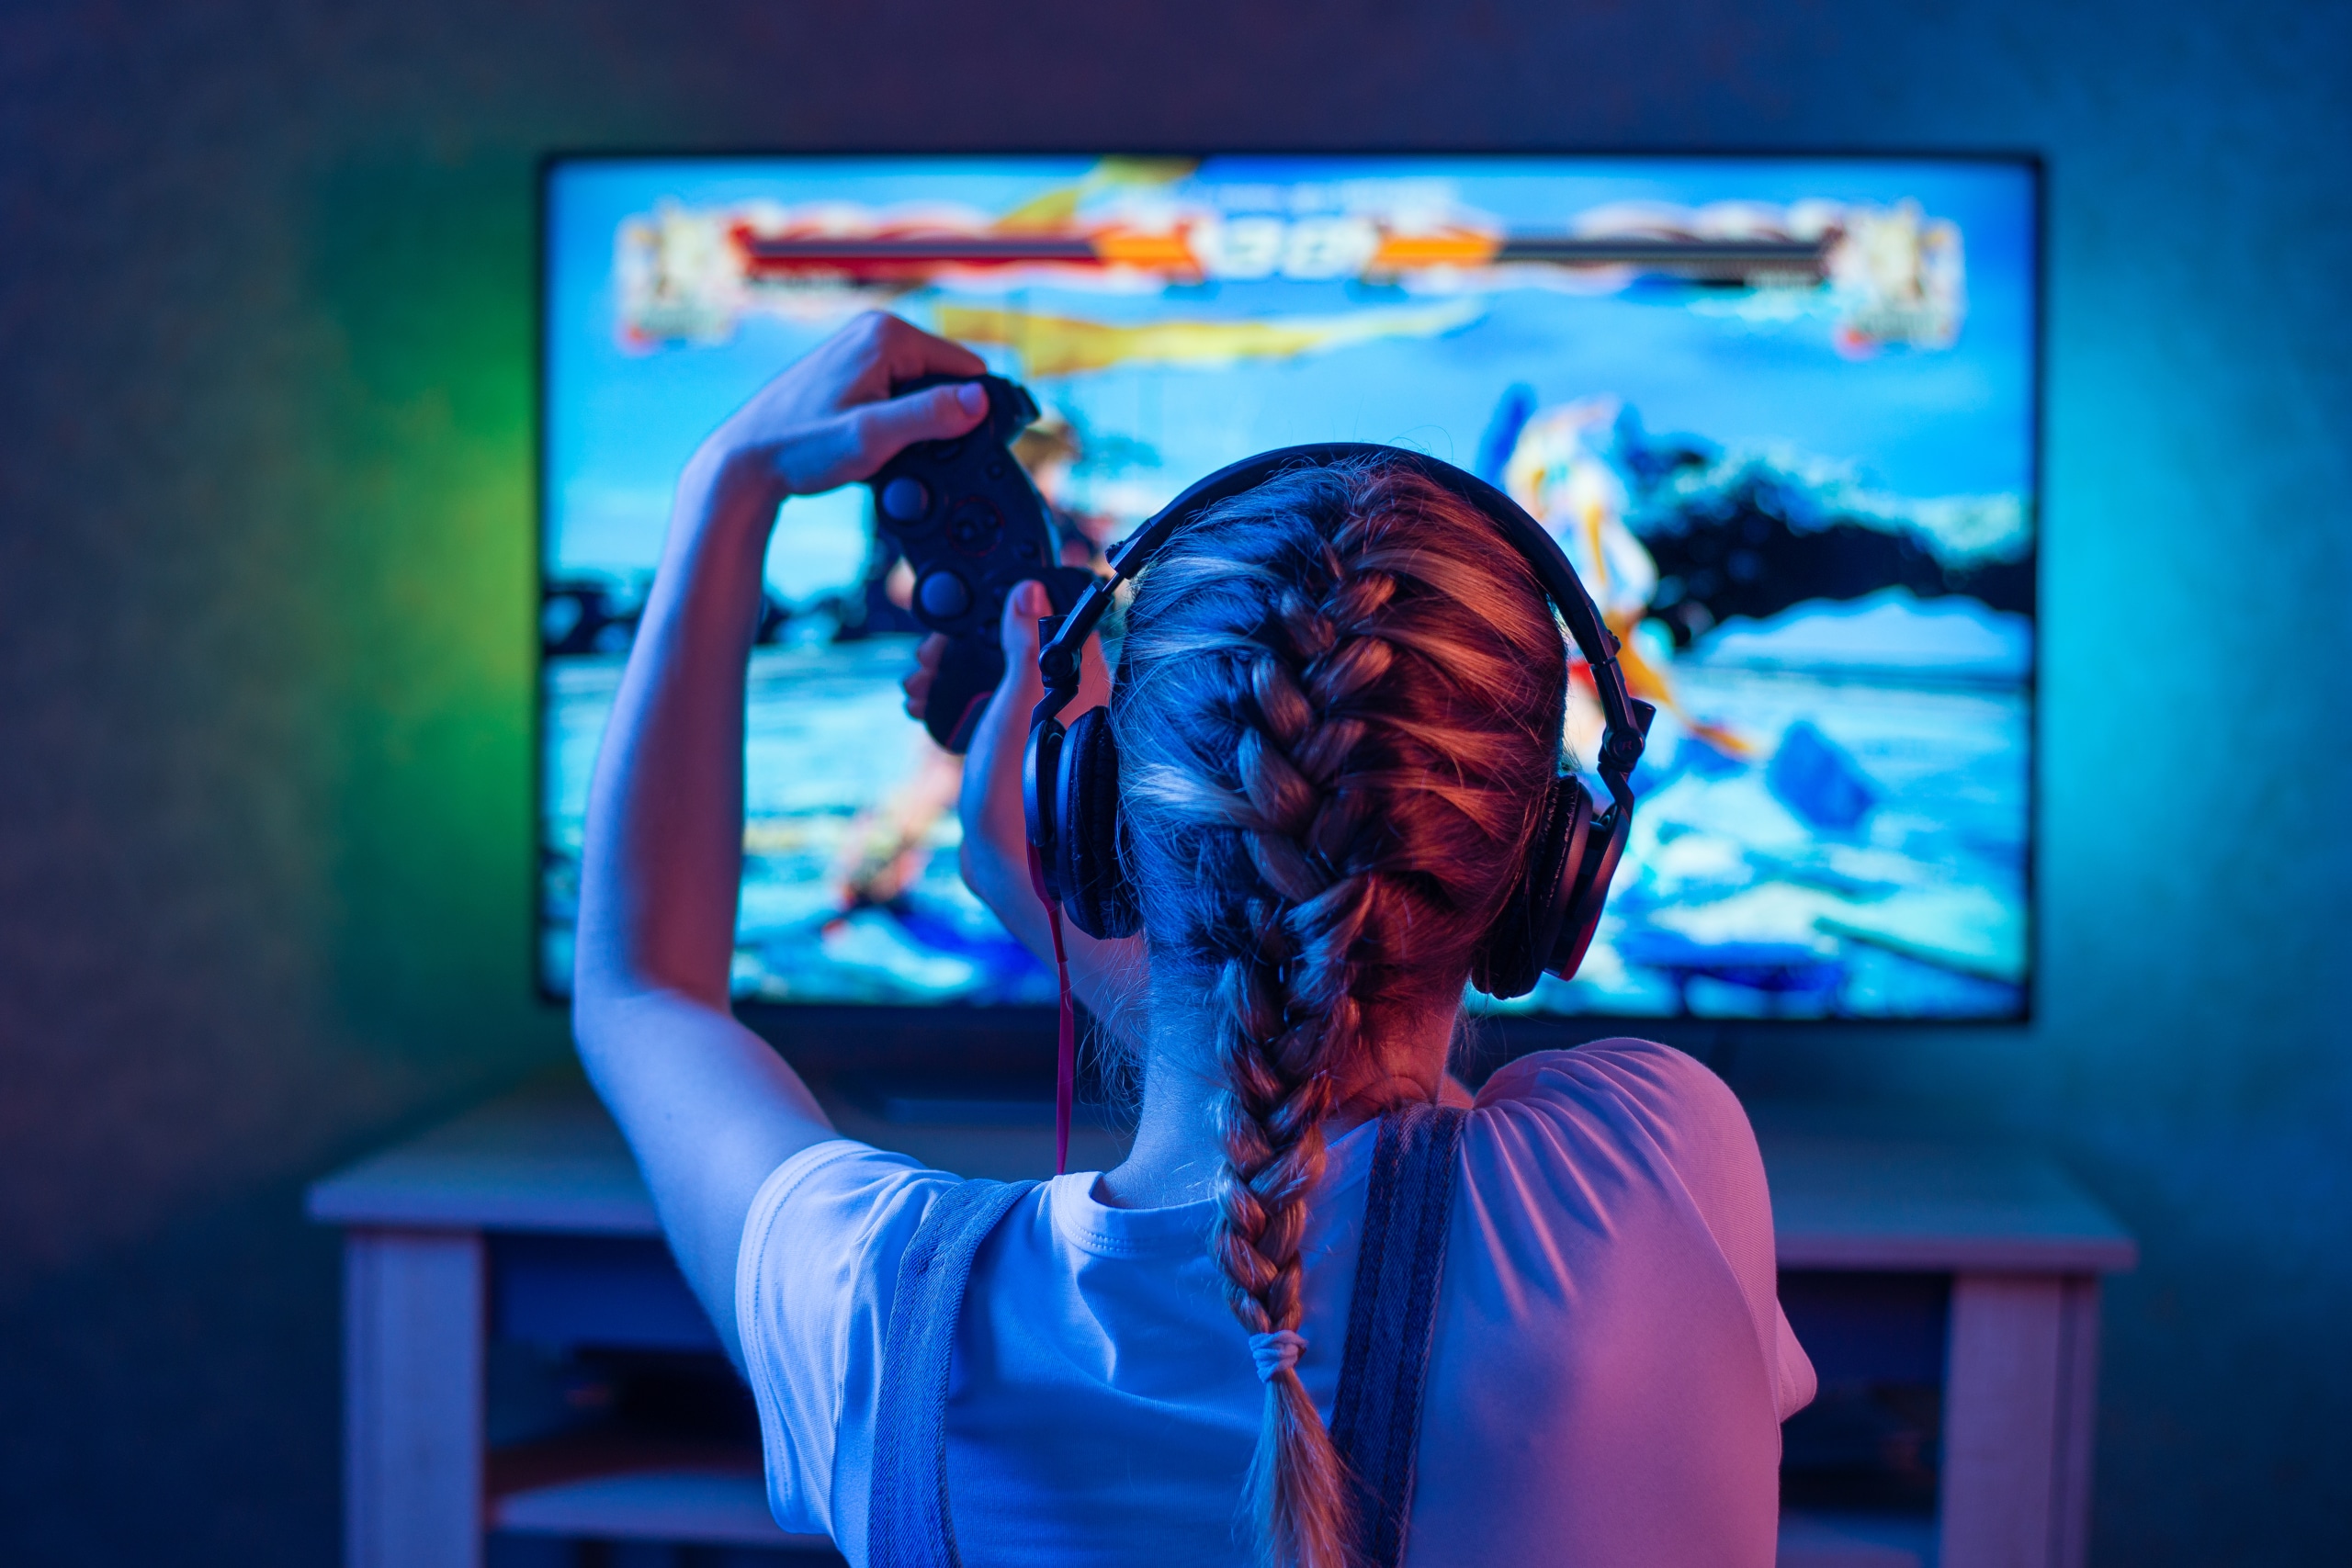 A young girl plays an online video game on a home network.